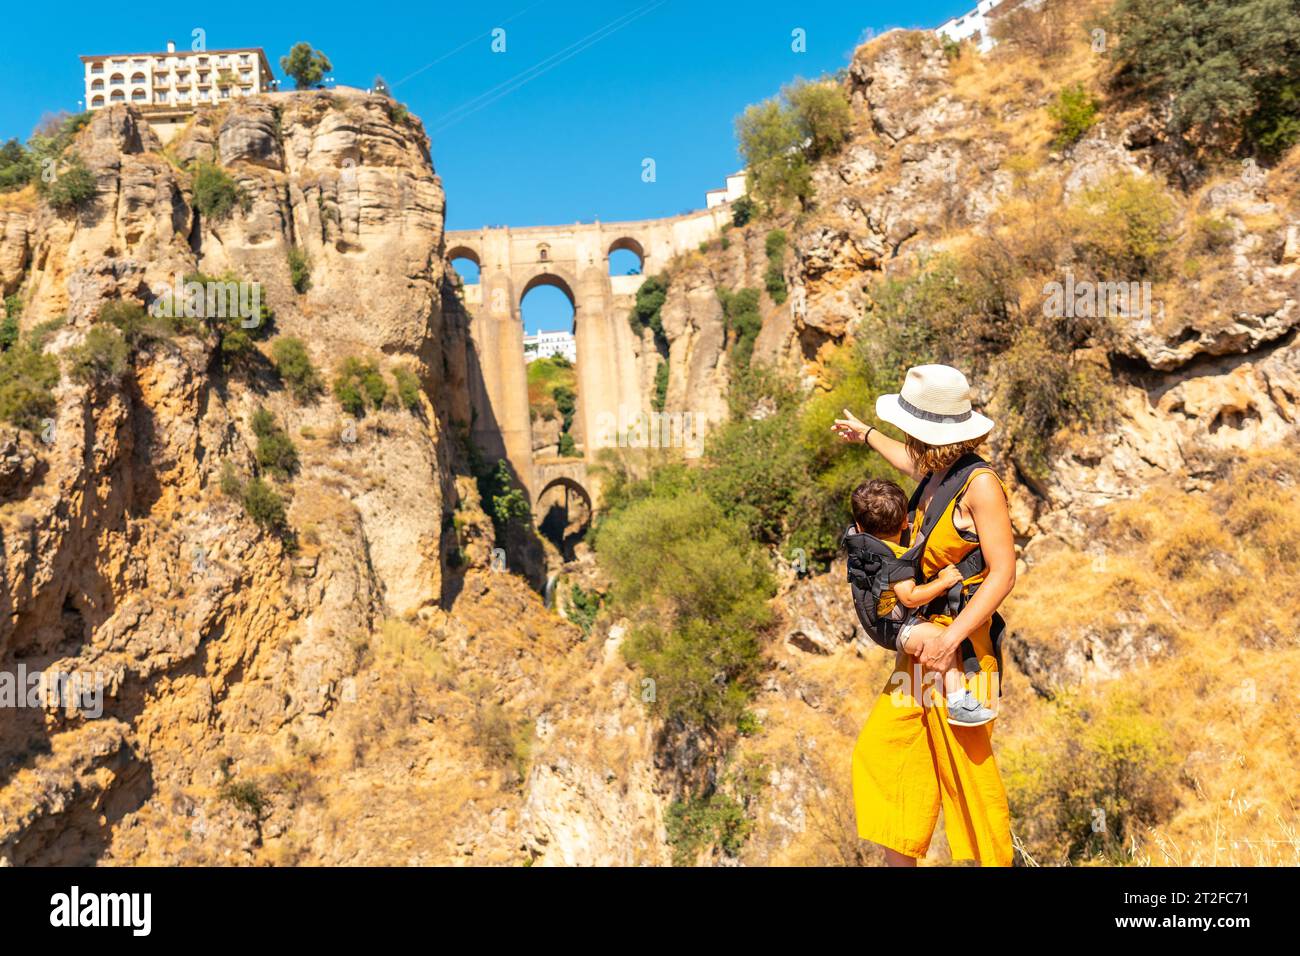 A young mother with her son at the new bridge viewpoint in Ronda Malaga province, Andalucia Stock Photo